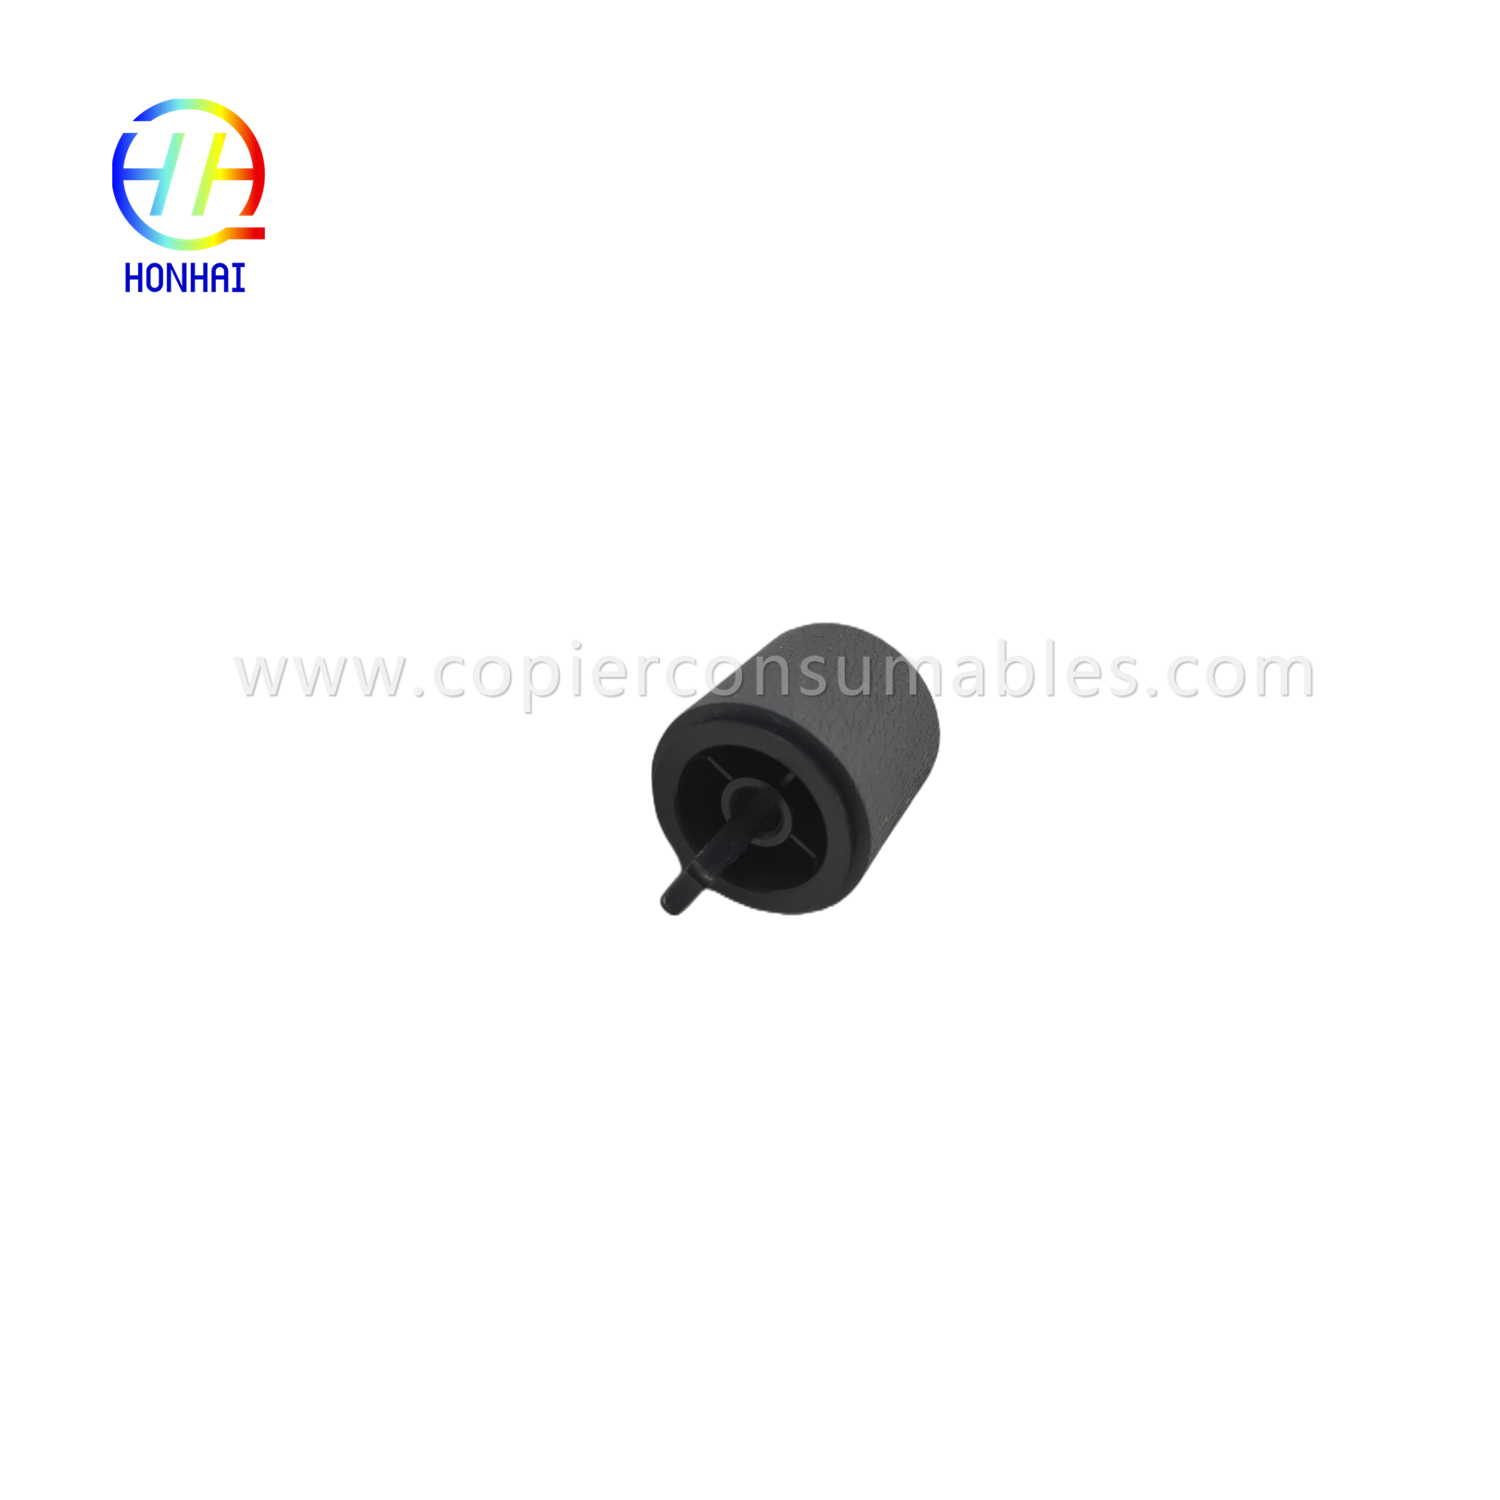 https://www.copierconsumables.com/original-pickup-roller-for-xerox-3315-3320-3325-pickup-feed-roller-130n01677-oem-product/